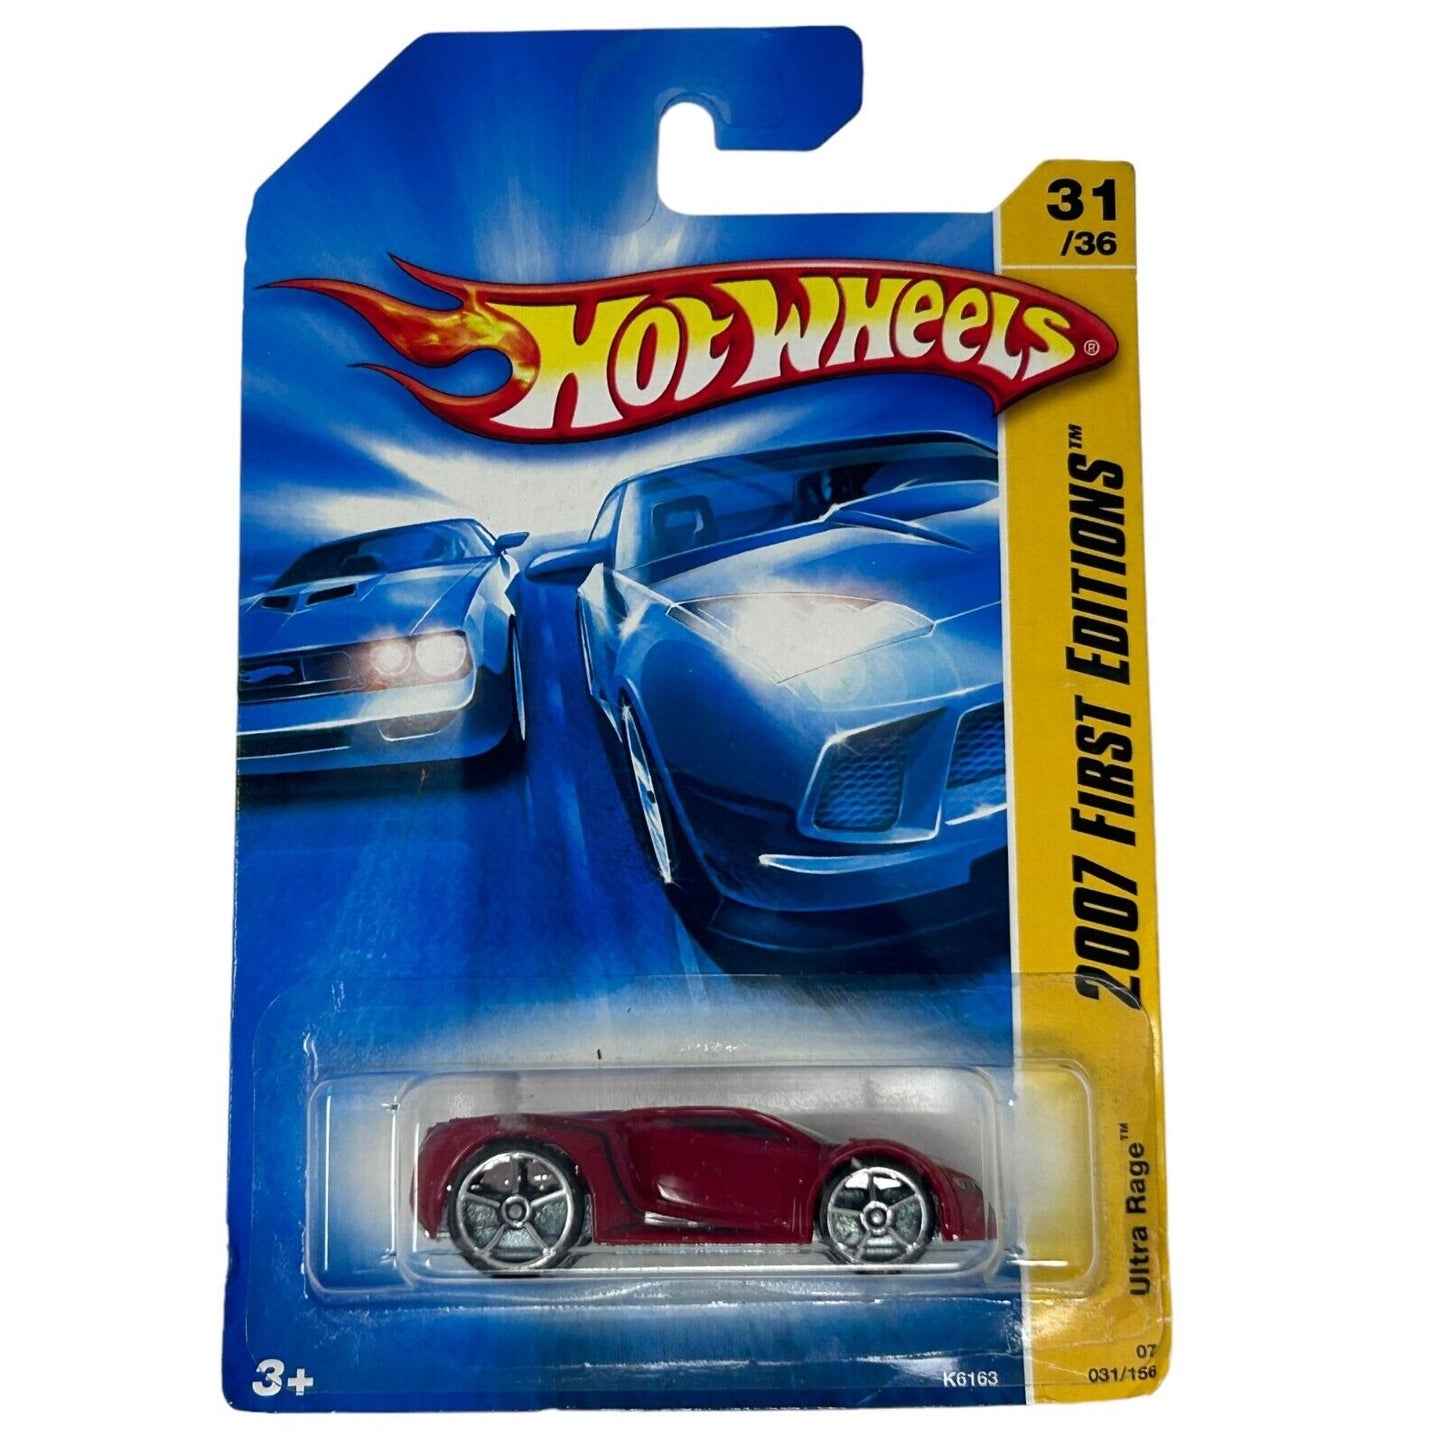 Ultra Rage Hot Wheels Collectible Diecast Car Red 2007 First Editions Vehicle Ne